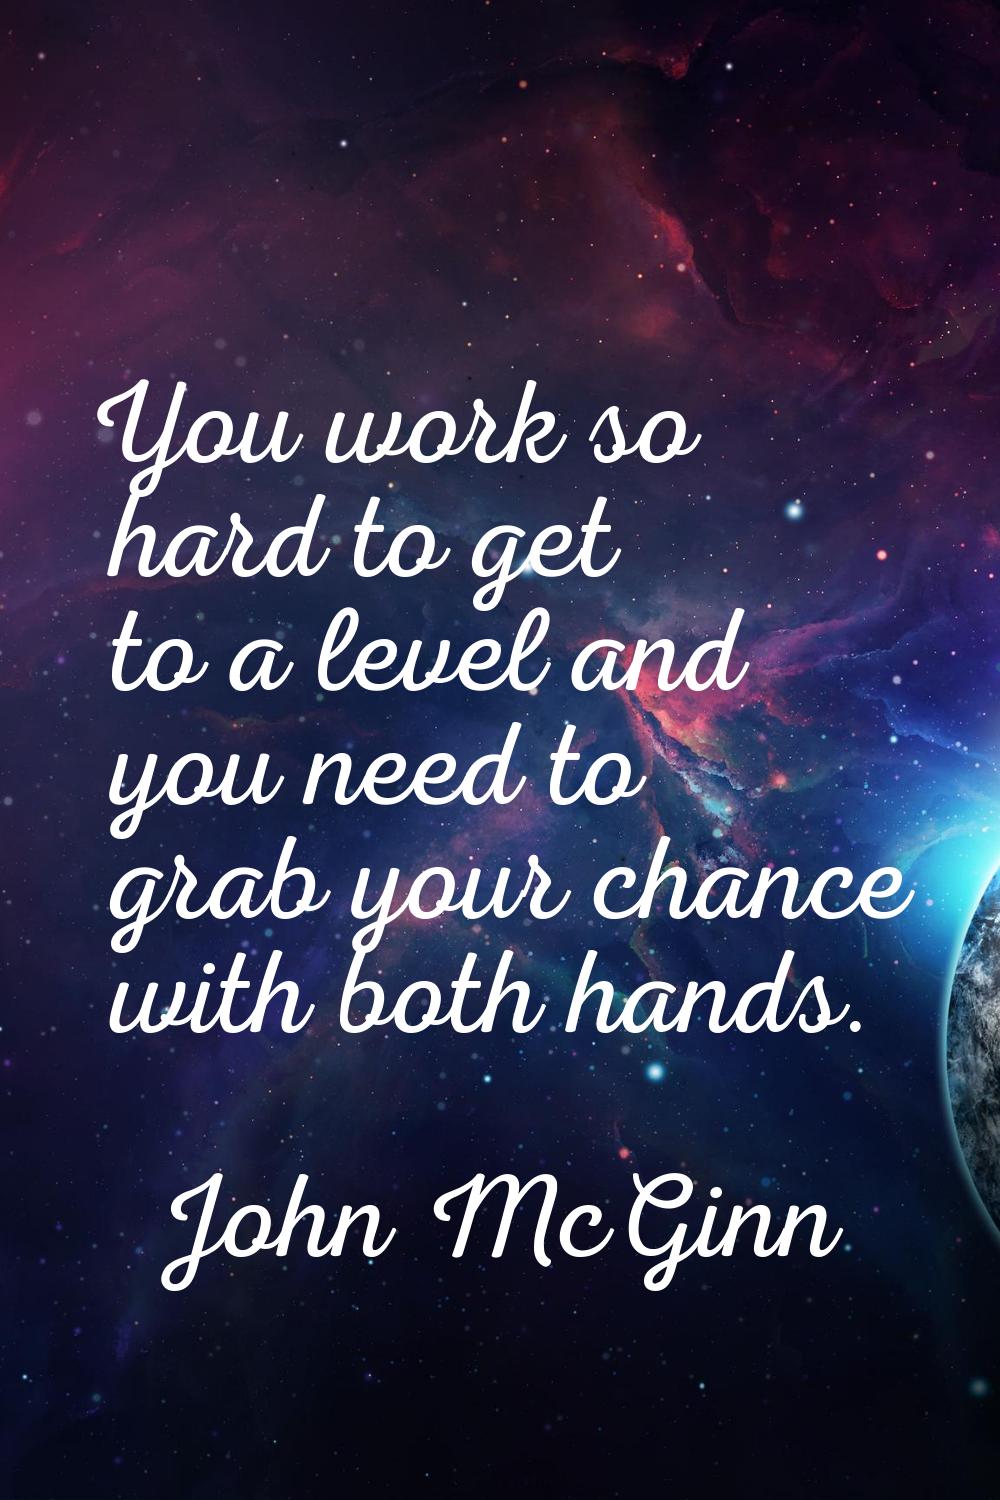 You work so hard to get to a level and you need to grab your chance with both hands.